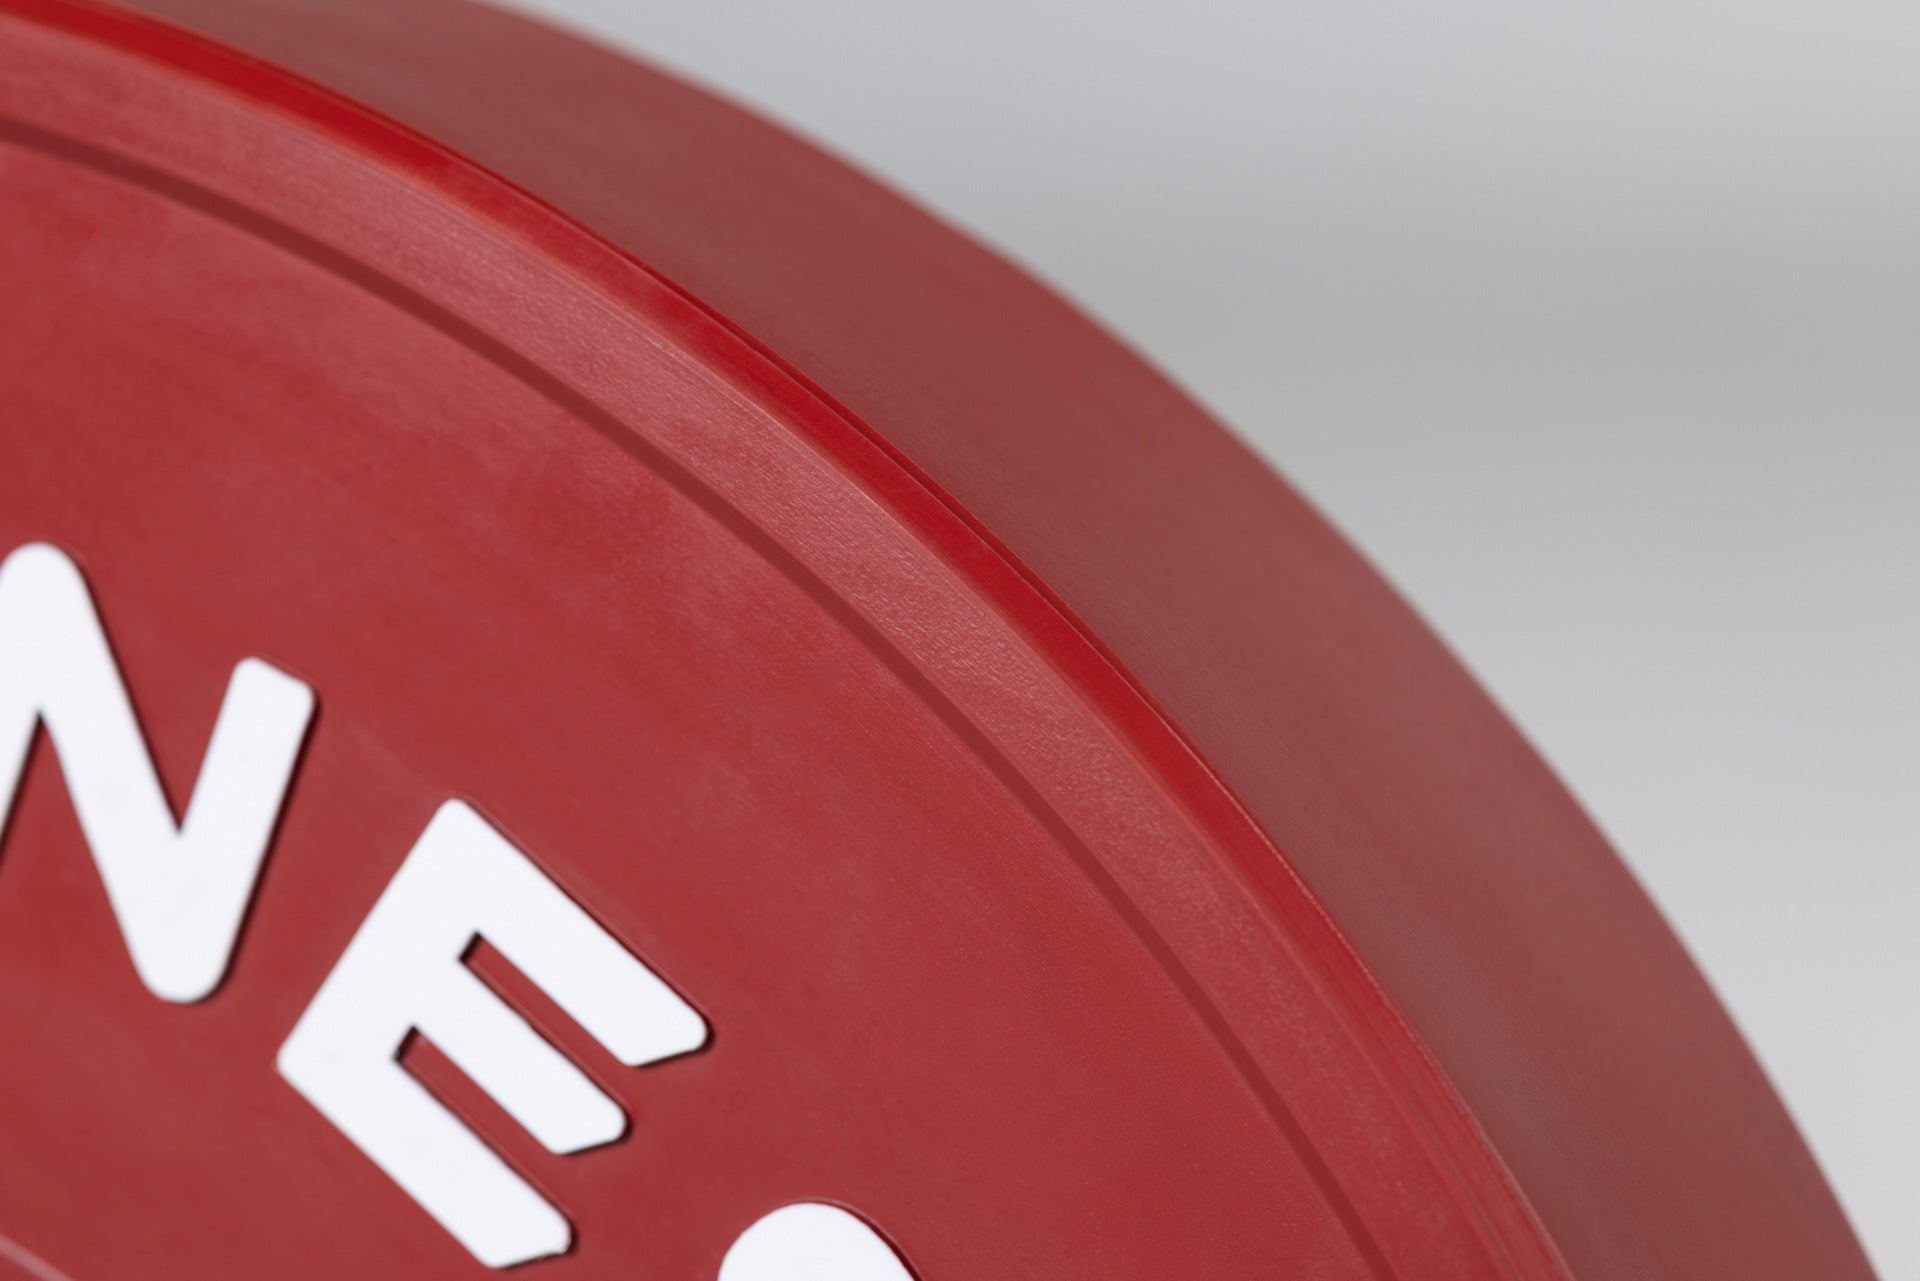 Close-up view of the edge of a red 55lb competition bumper plate.